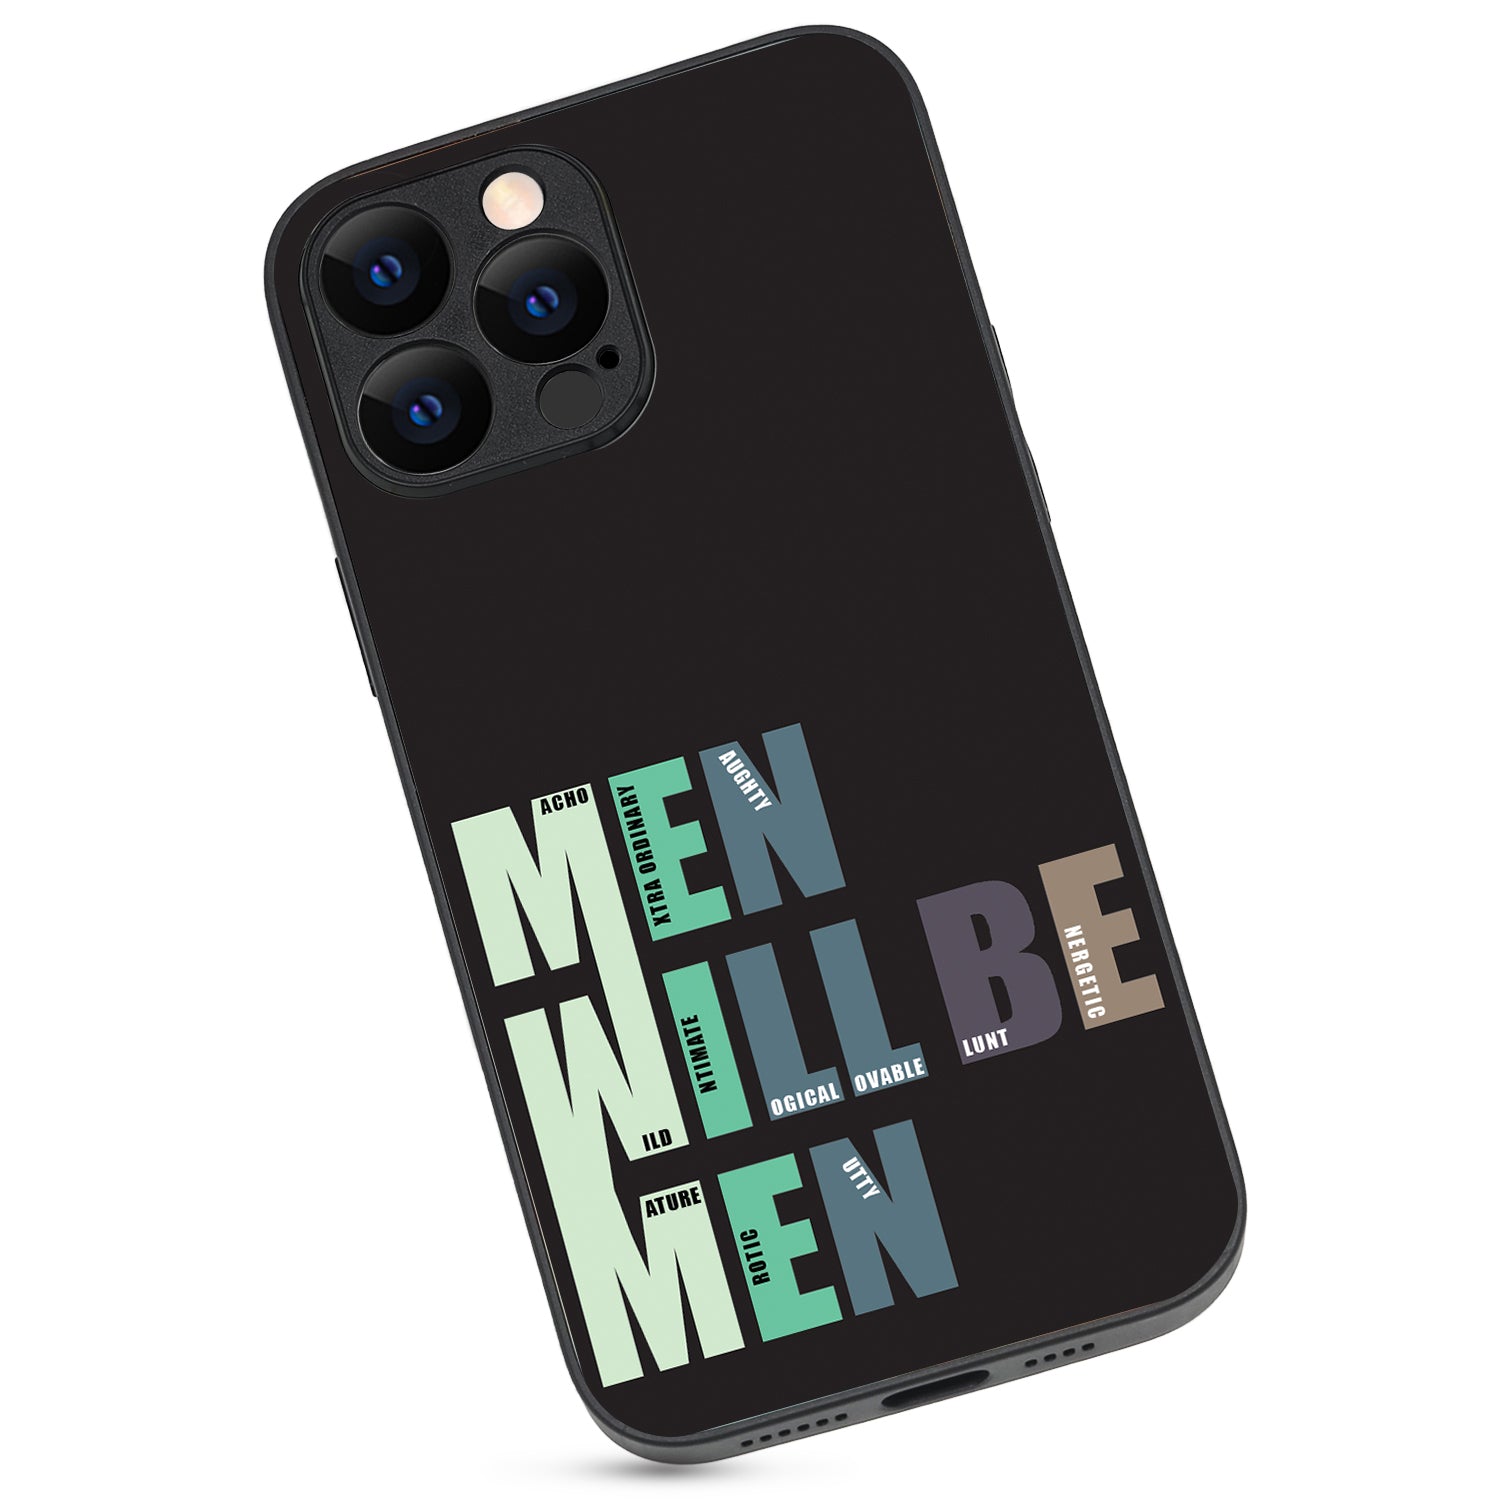 Men Will Be Men Motivational Quotes iPhone 13 Pro Max Case